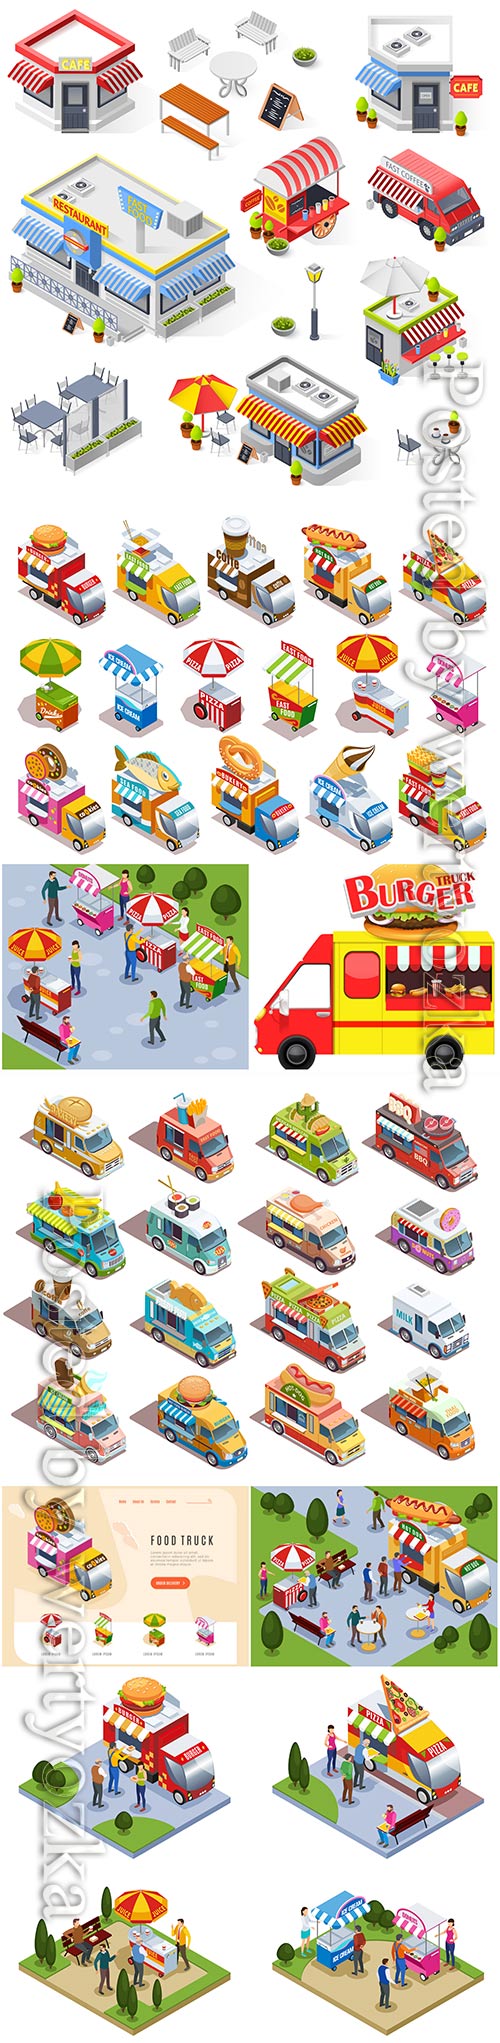 Food trucks and street carts vending fast food drinks and ice cream isometr ...